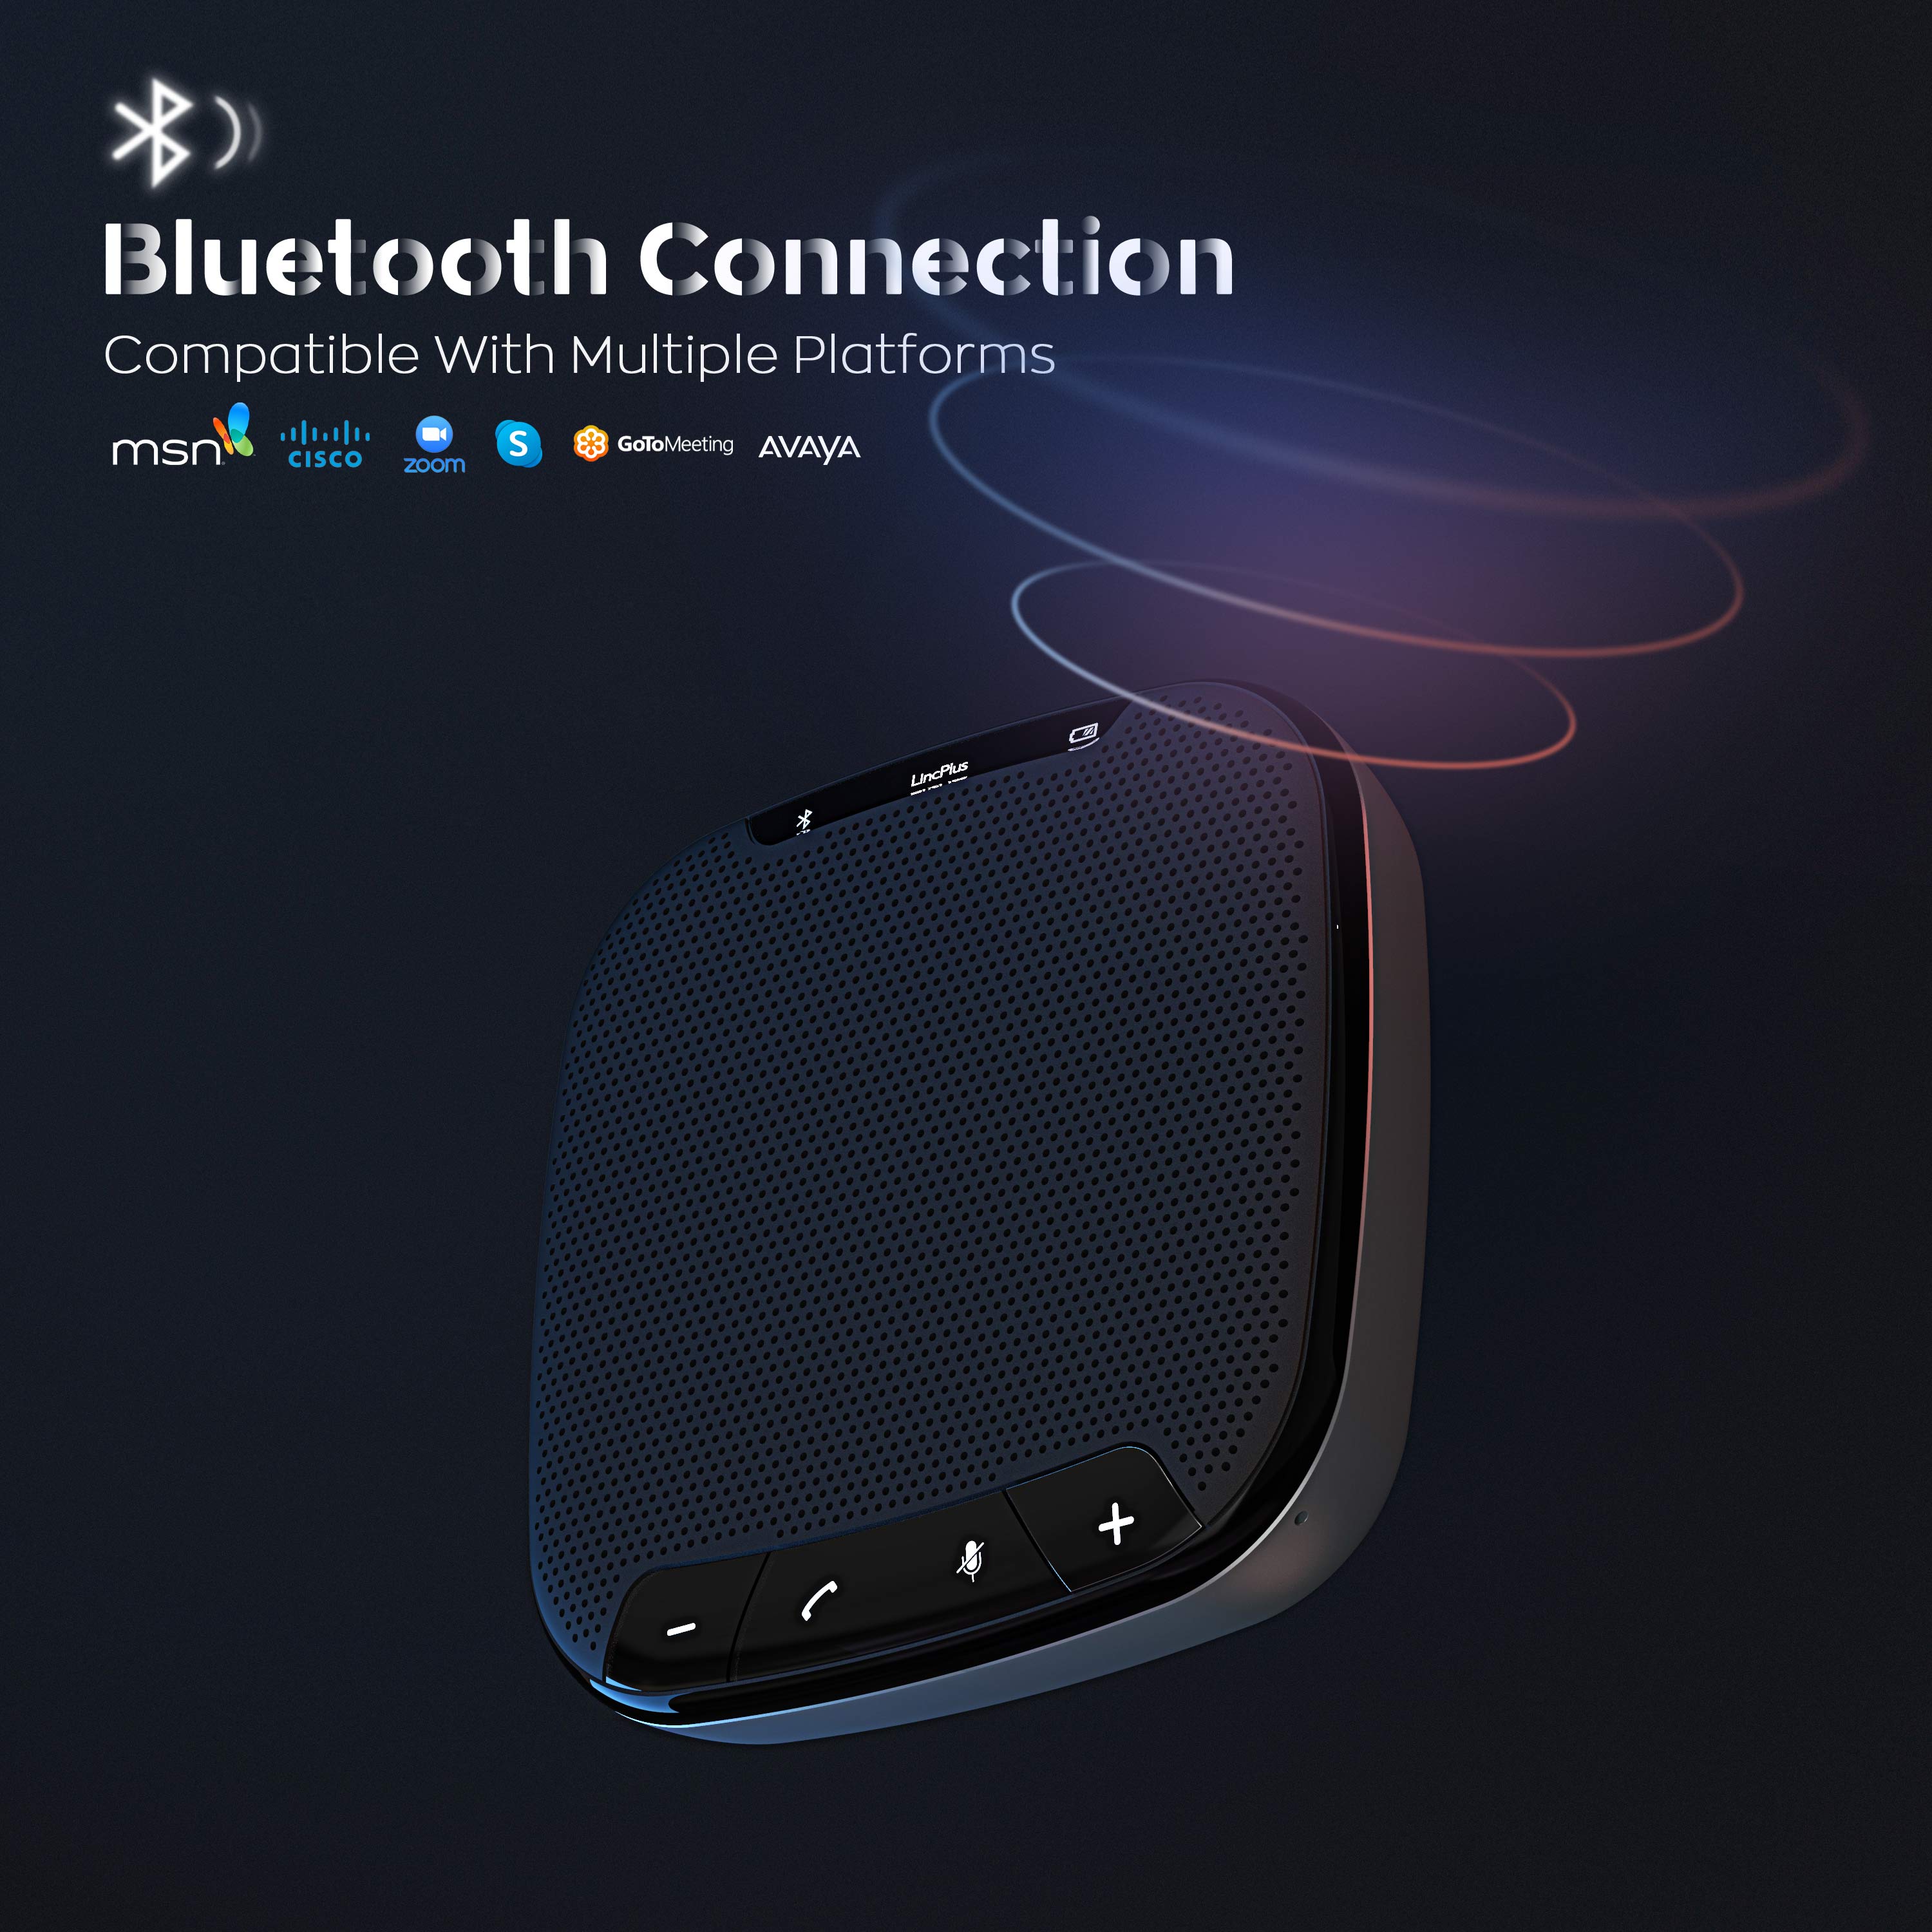 lincplus speakerphone with Bluetooth connection-support multiple platform